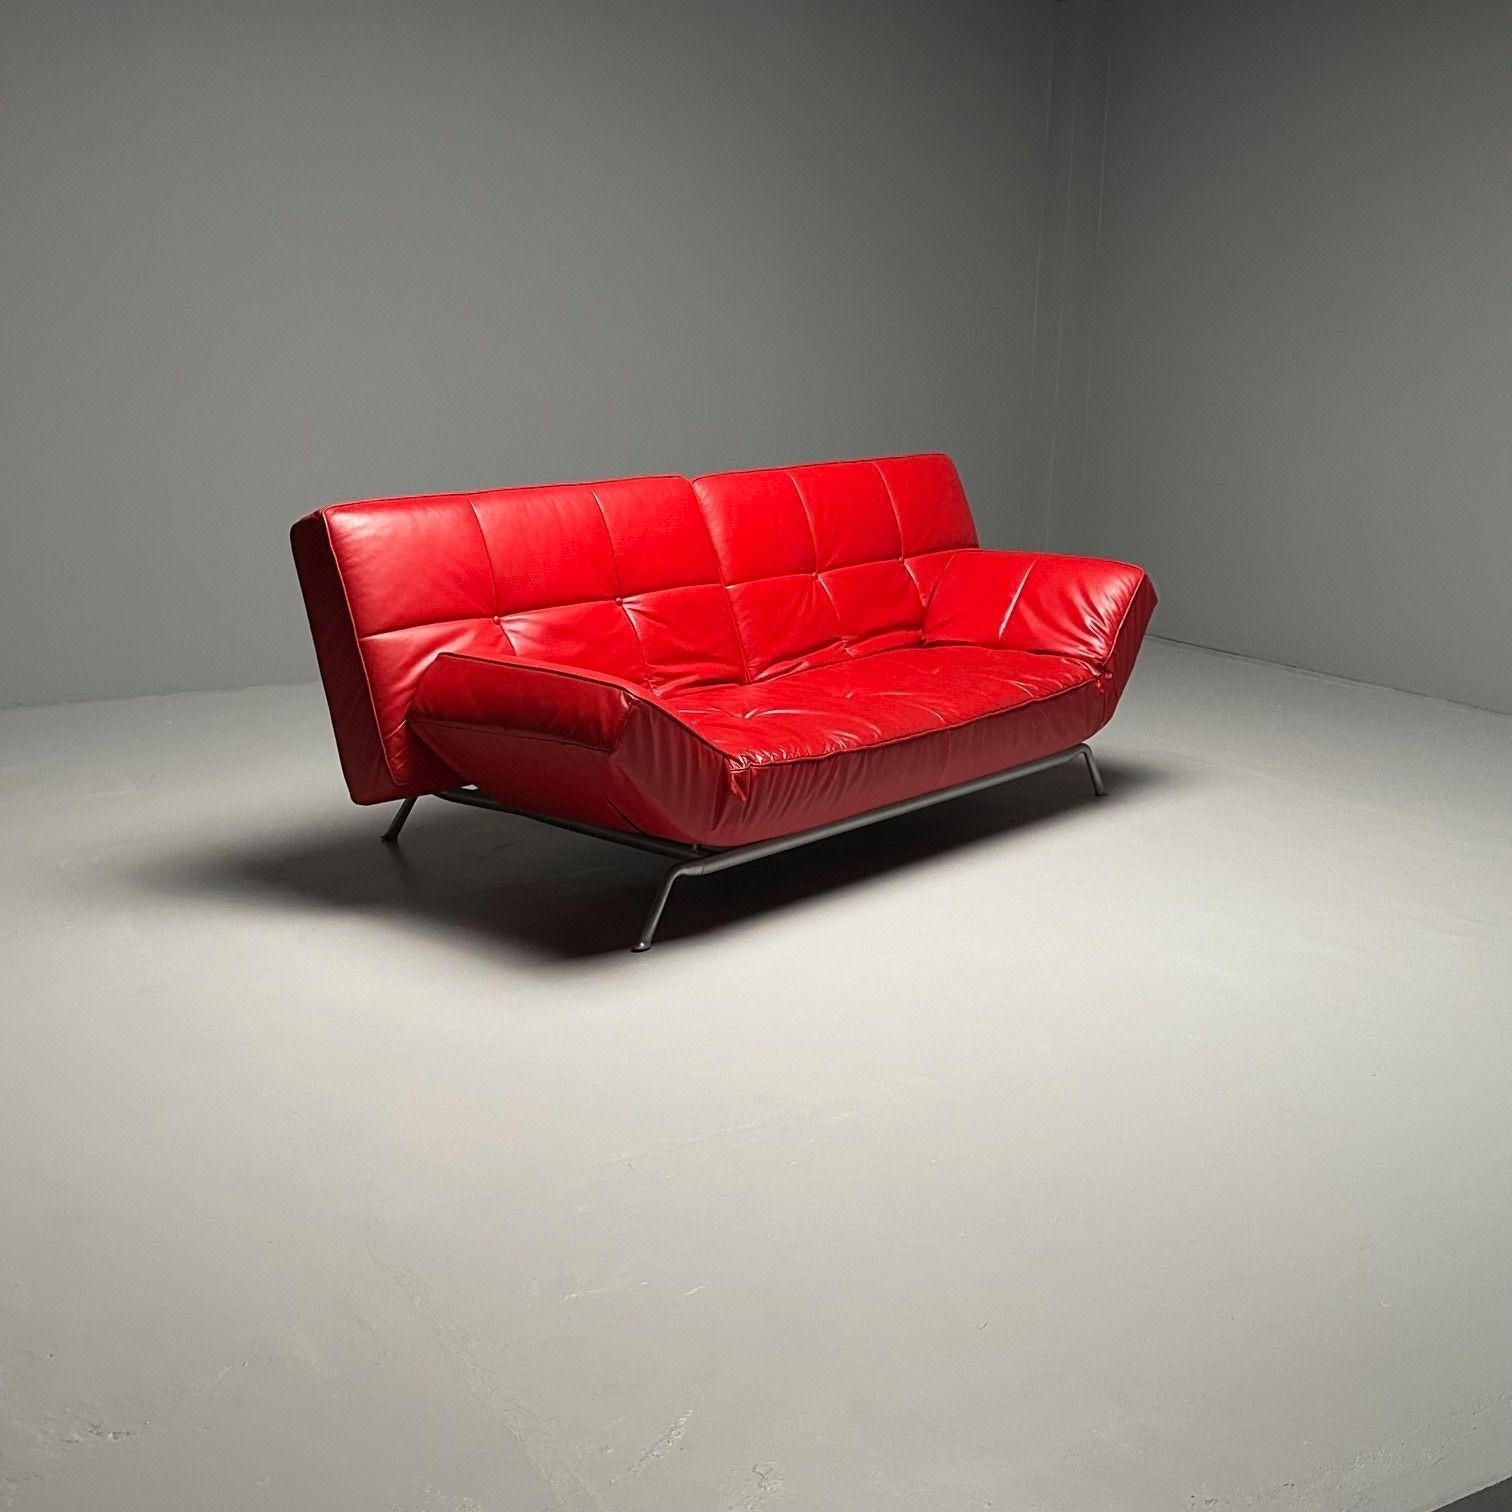 Mid-Century Modern Pascal Mourgue, Ligne Roset, Smala Adjustable Daybed, Sofa, Red Leather, France